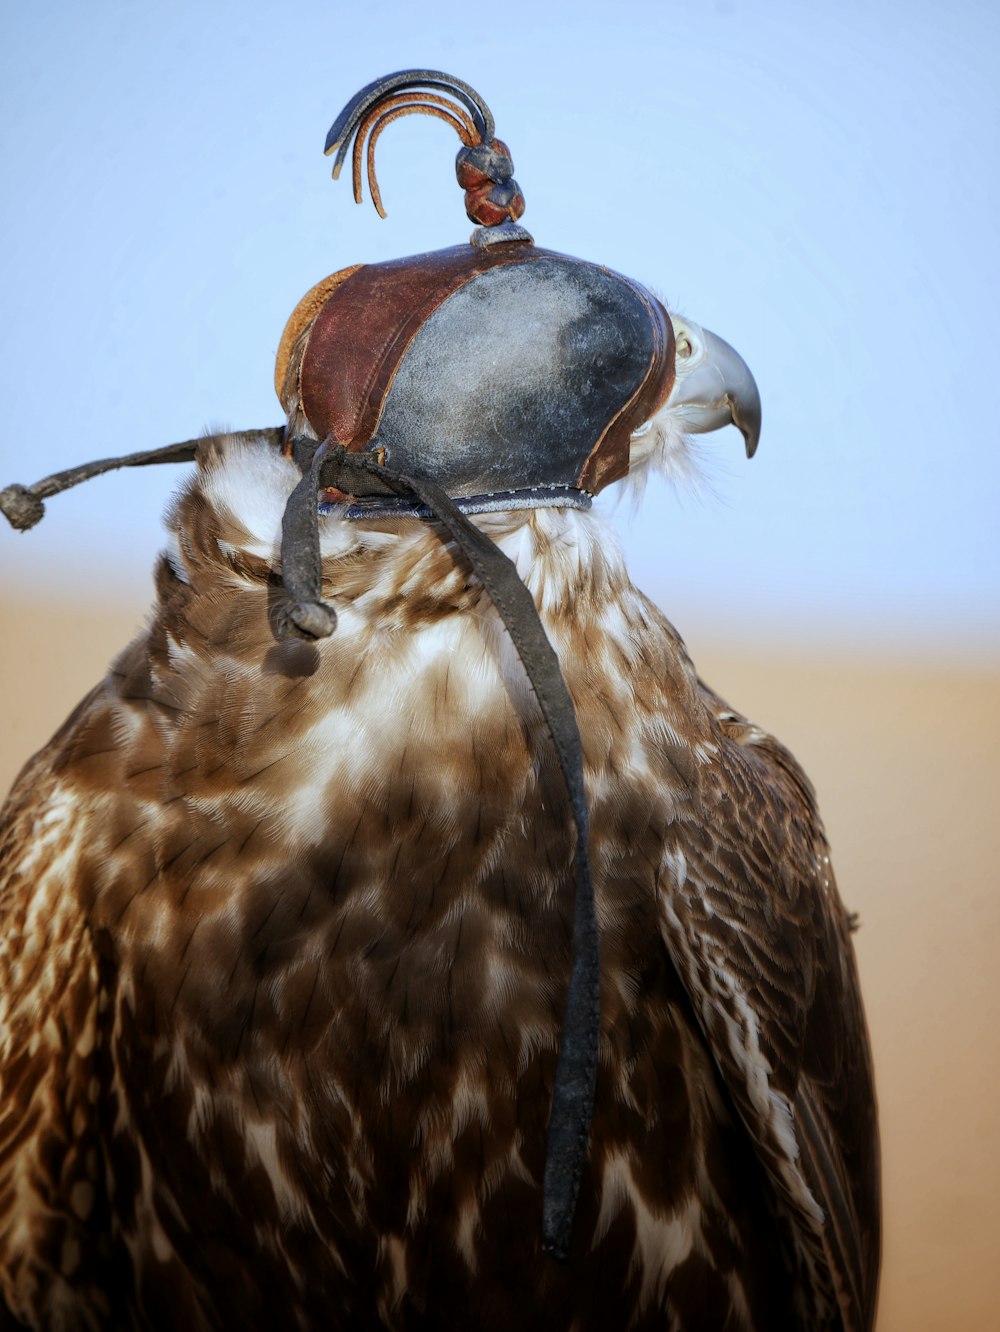 a close up of a bird of prey wearing a hat